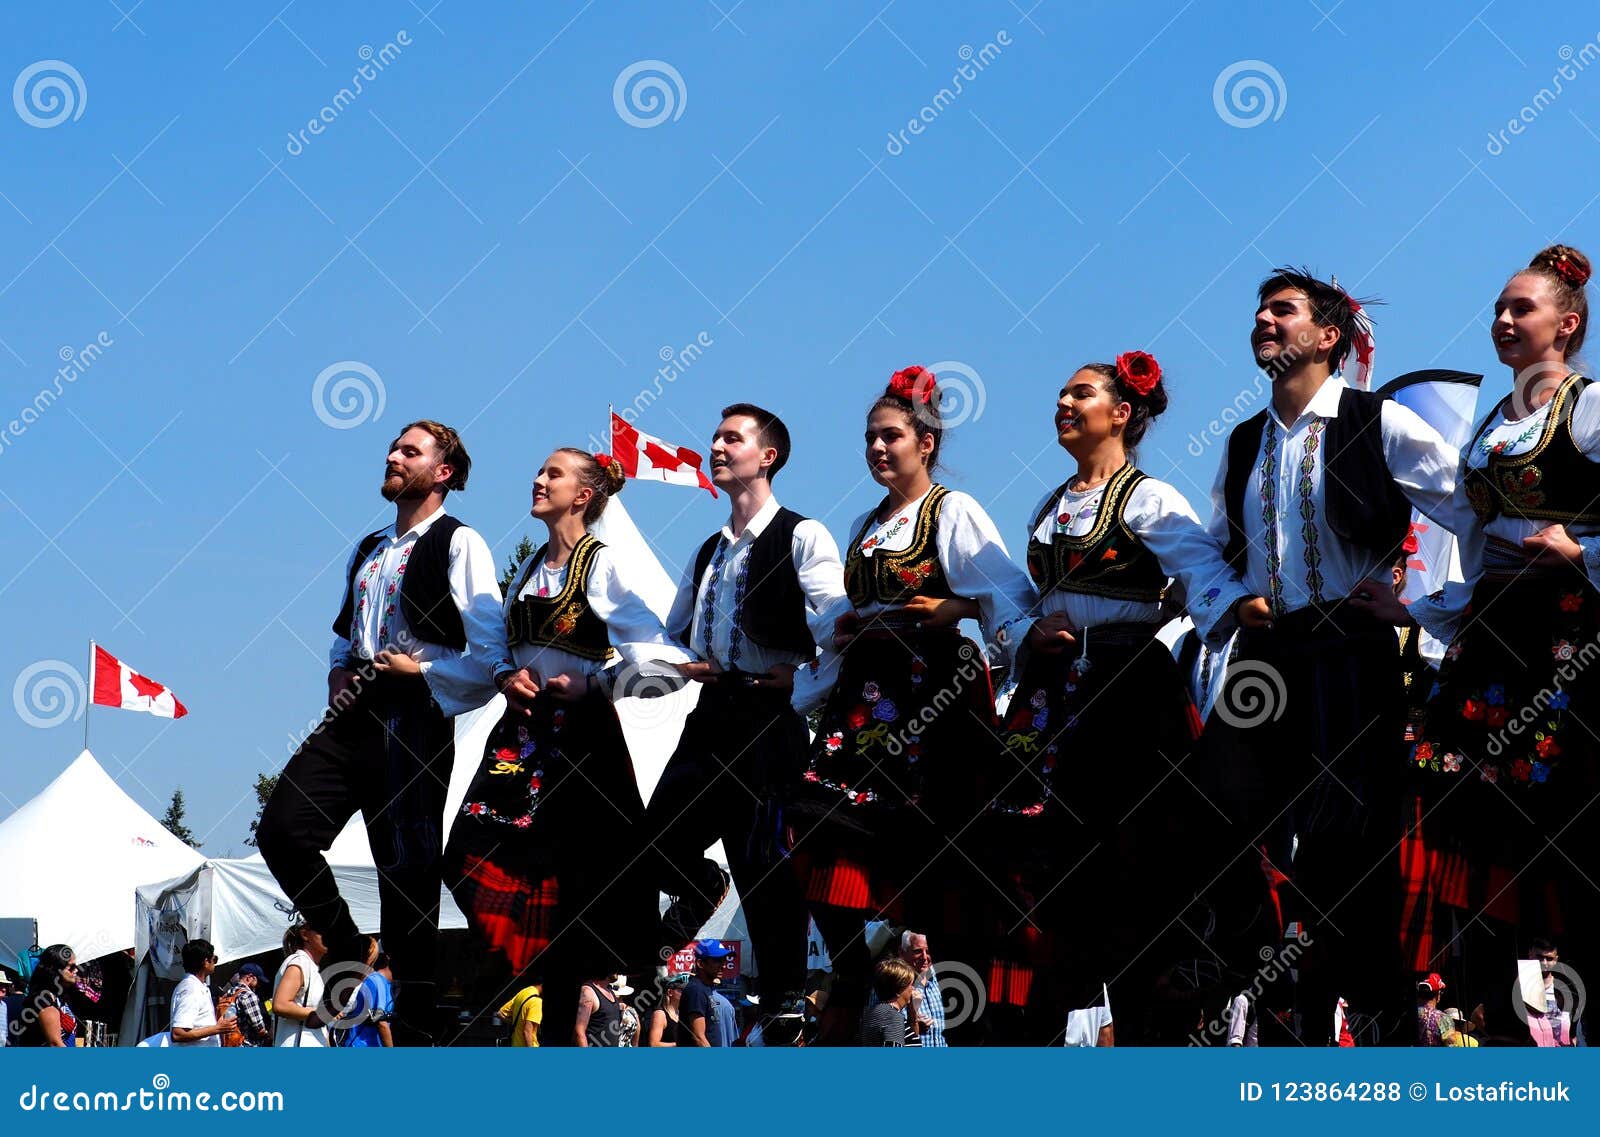 Eastern European Dancers In Traditional Dress Editorial Stock Photo Image Of Celebration Tradition 123864288